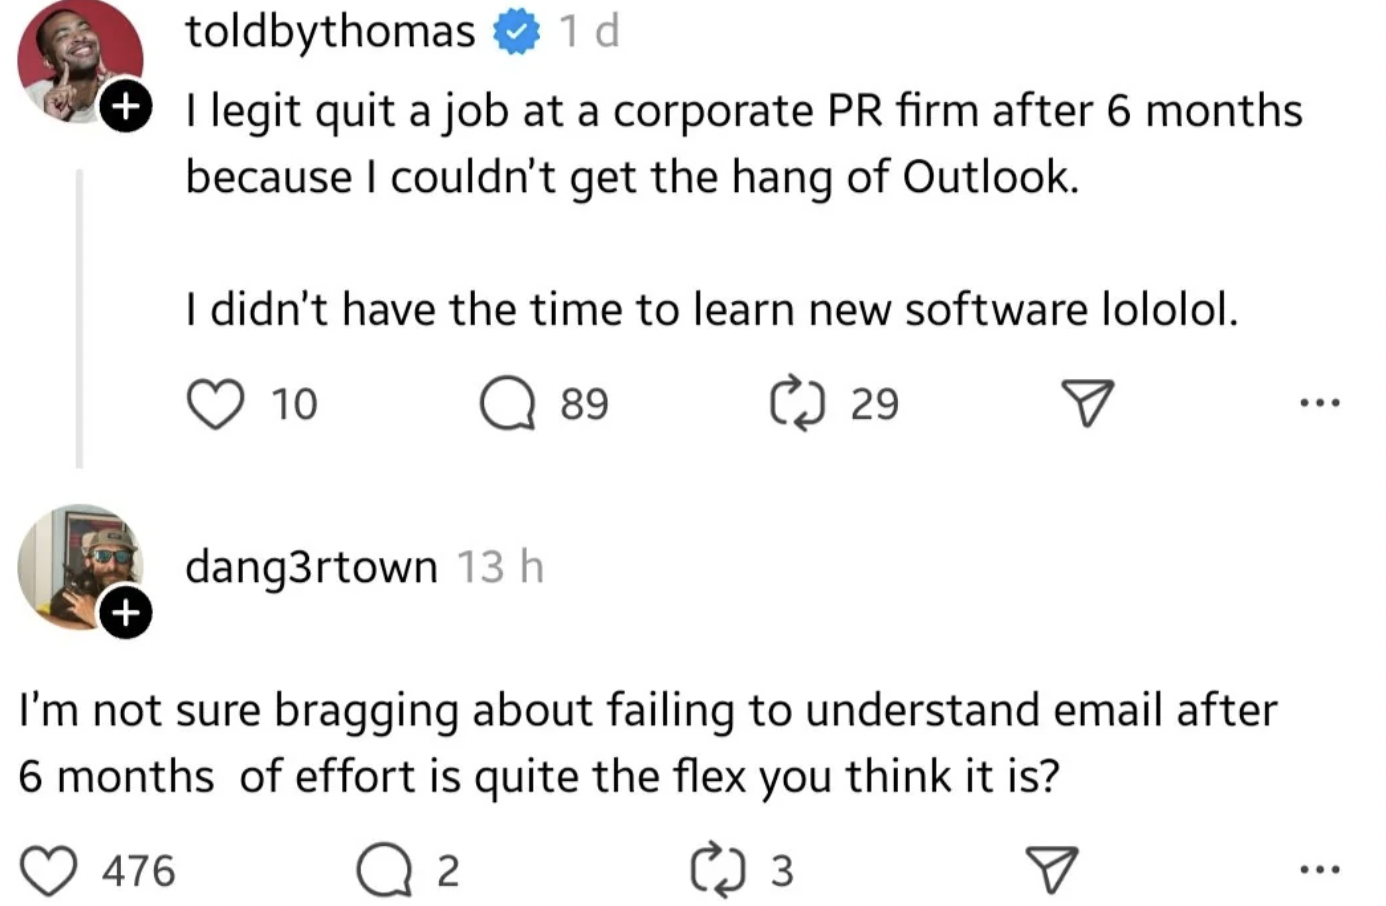 screenshot - toldbythomas 1 d I legit quit a job at a corporate Pr firm after 6 months because I couldn't get the hang of Outlook. I didn't have the time to learn new software lololol. 10 dang3rtown 13 h 89 29 I'm not sure bragging about failing to unders